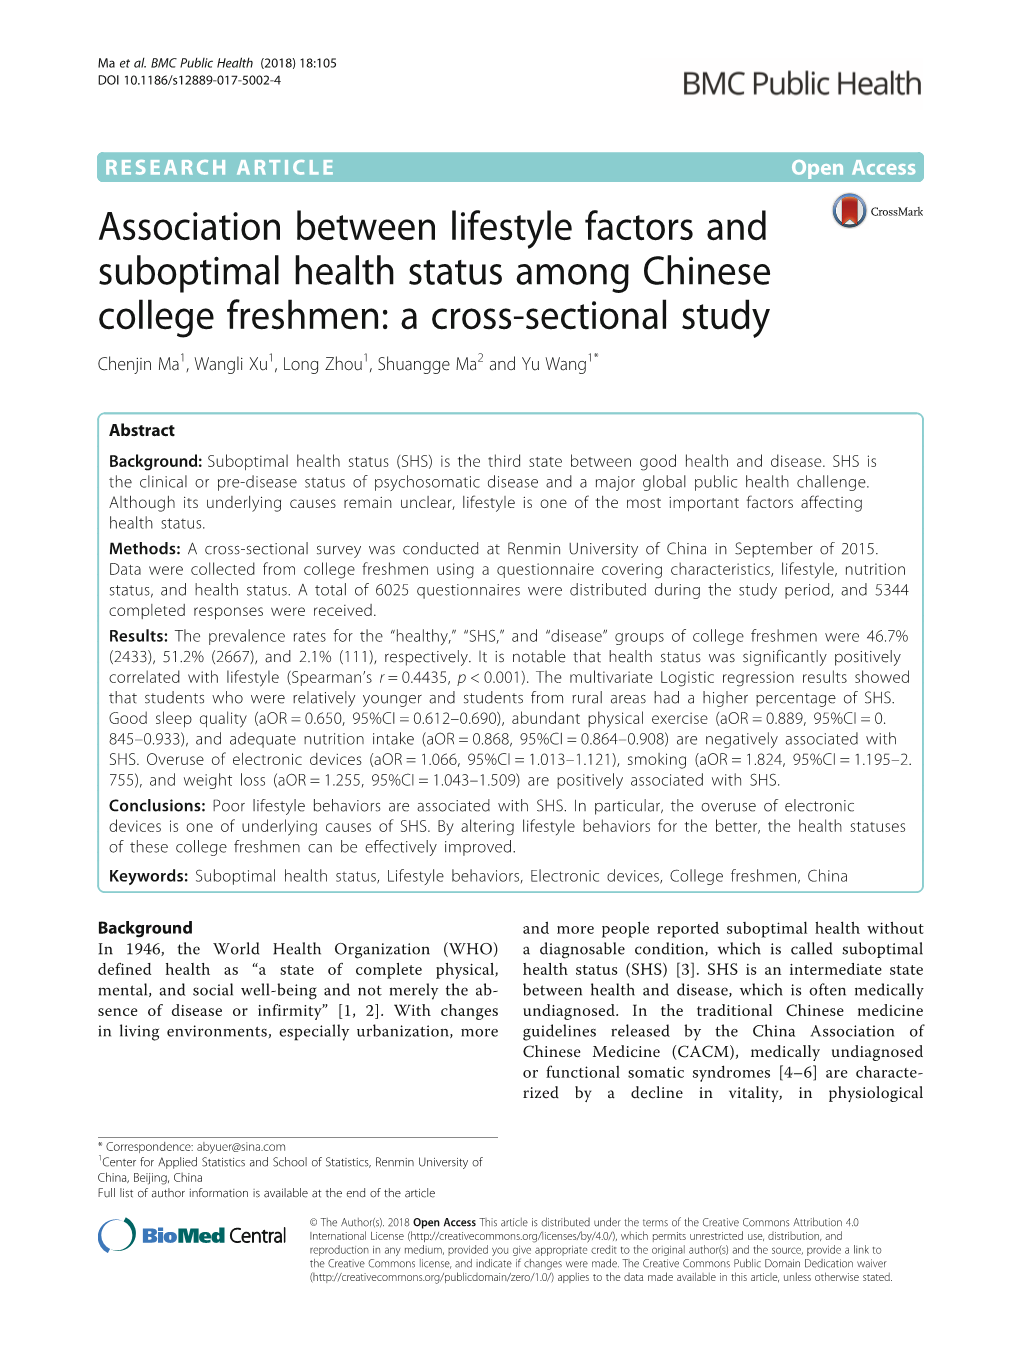 Association Between Lifestyle Factors And